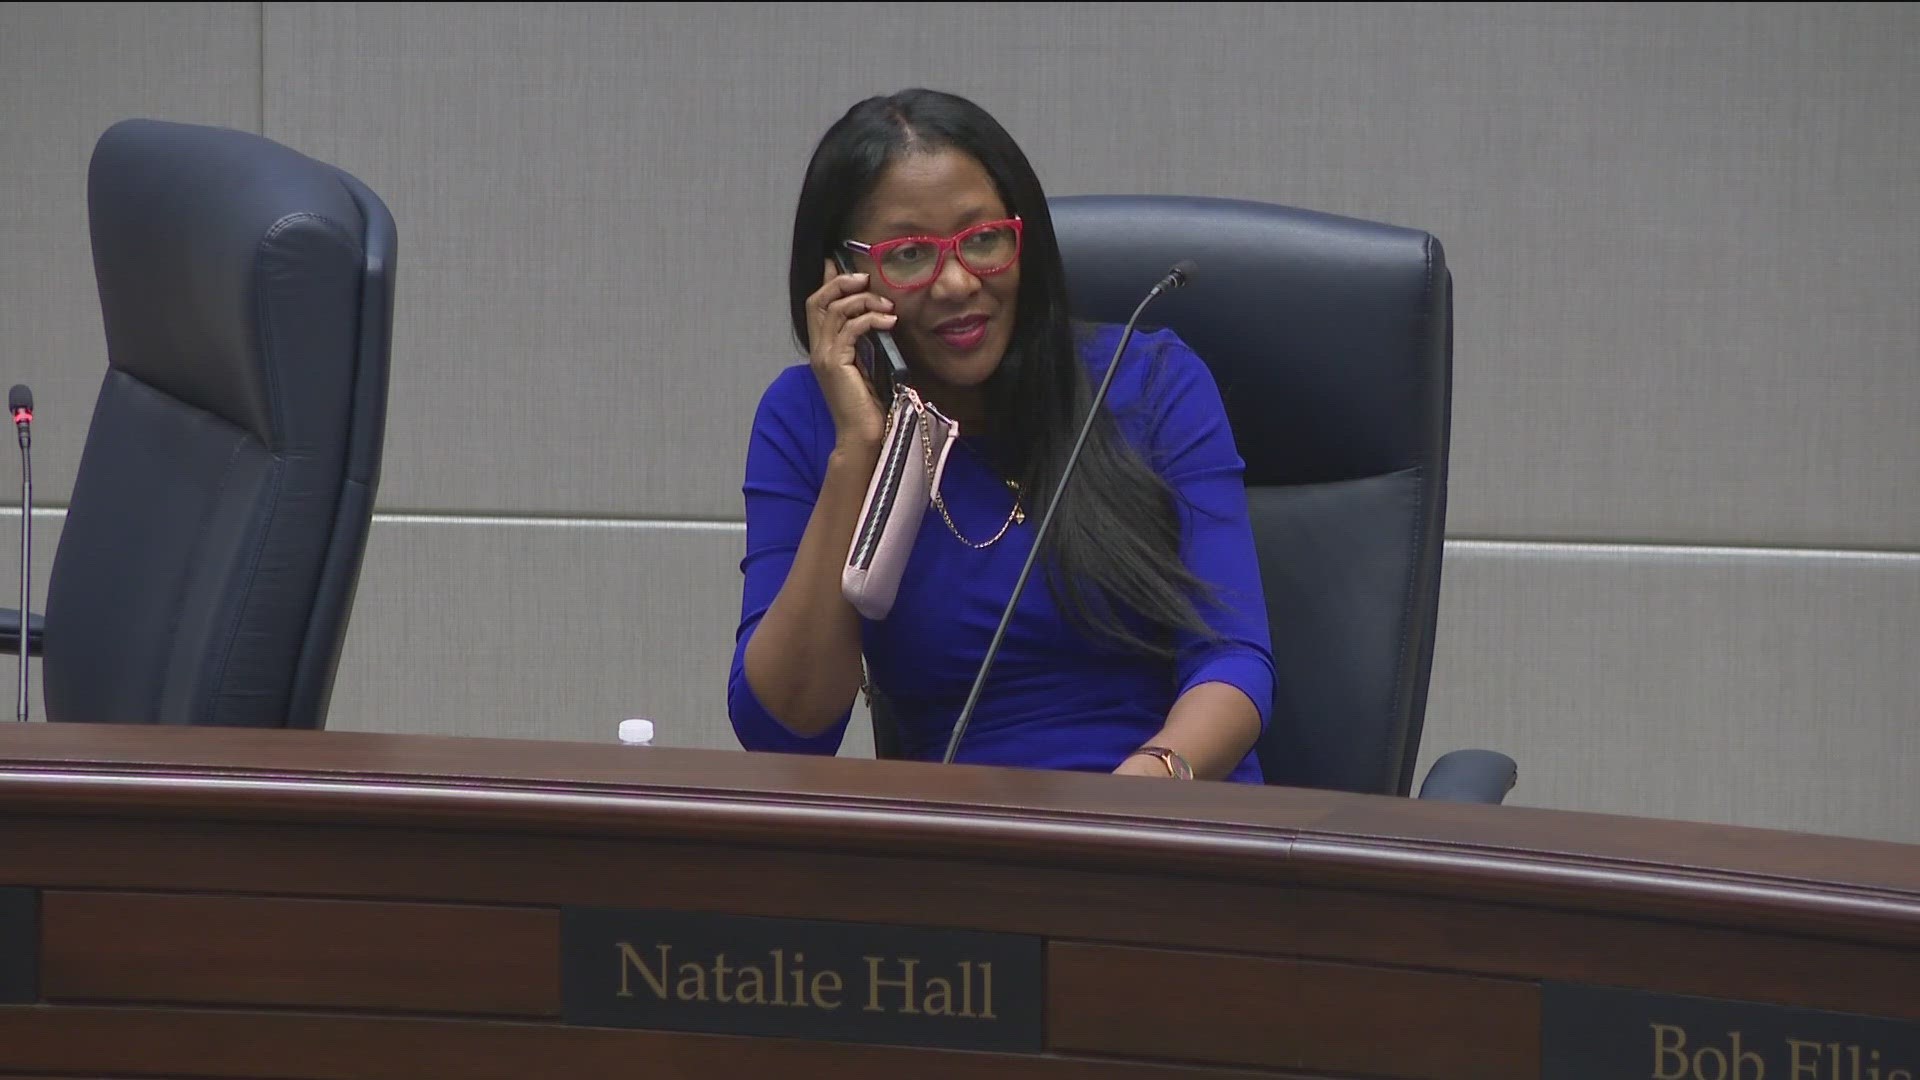 Leaders voted 5 to 1 to censure Commissioner Natalie Hall on Wednesday for her previous relationship with her now-former chief of staff.